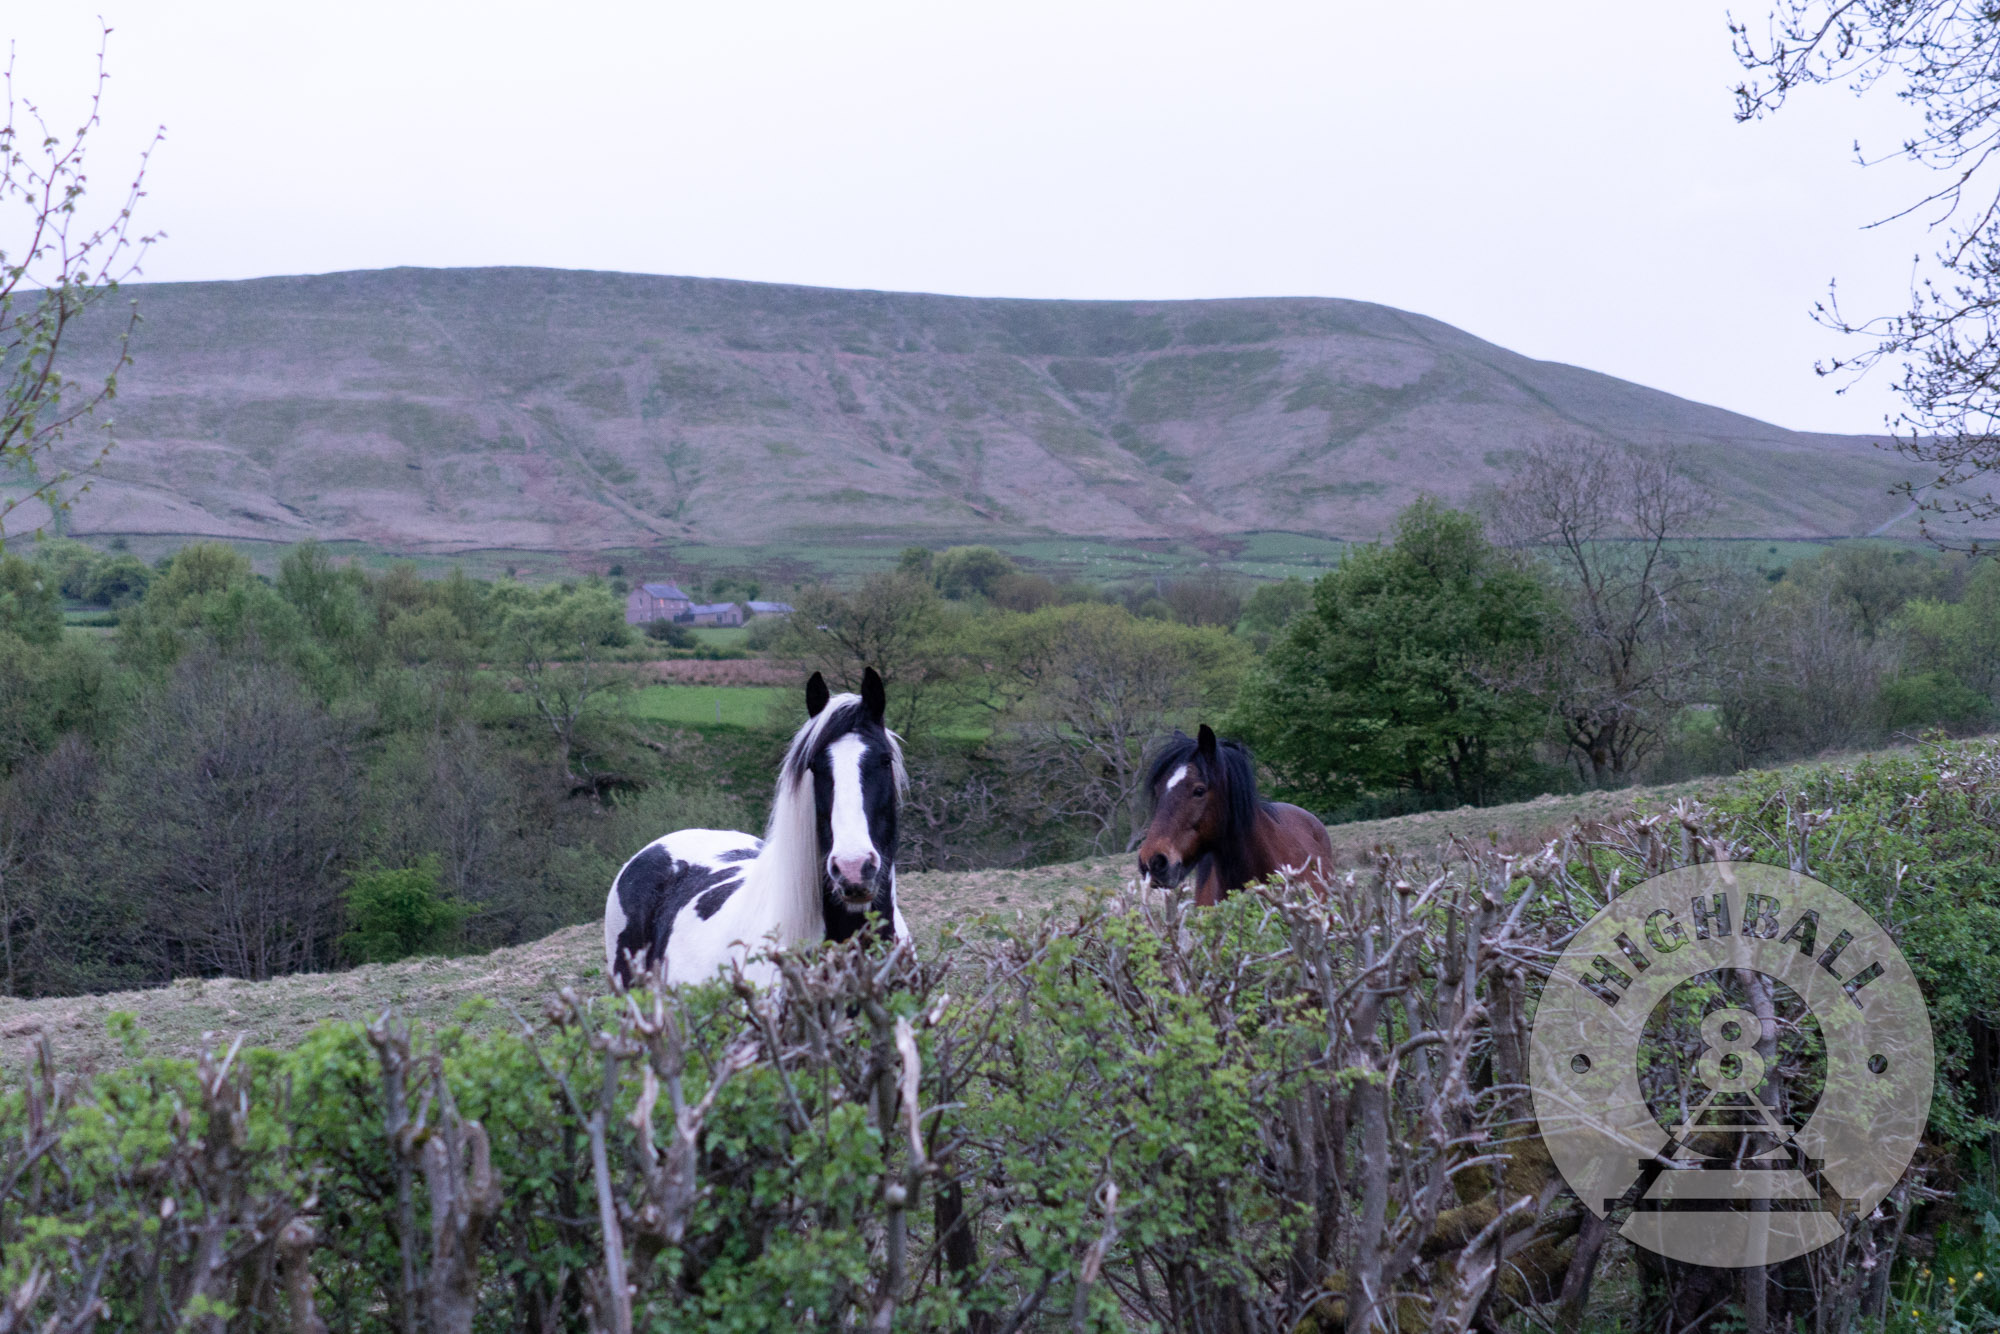 Two horses in the Peak District, Derbyshire, England, UK, 2018.